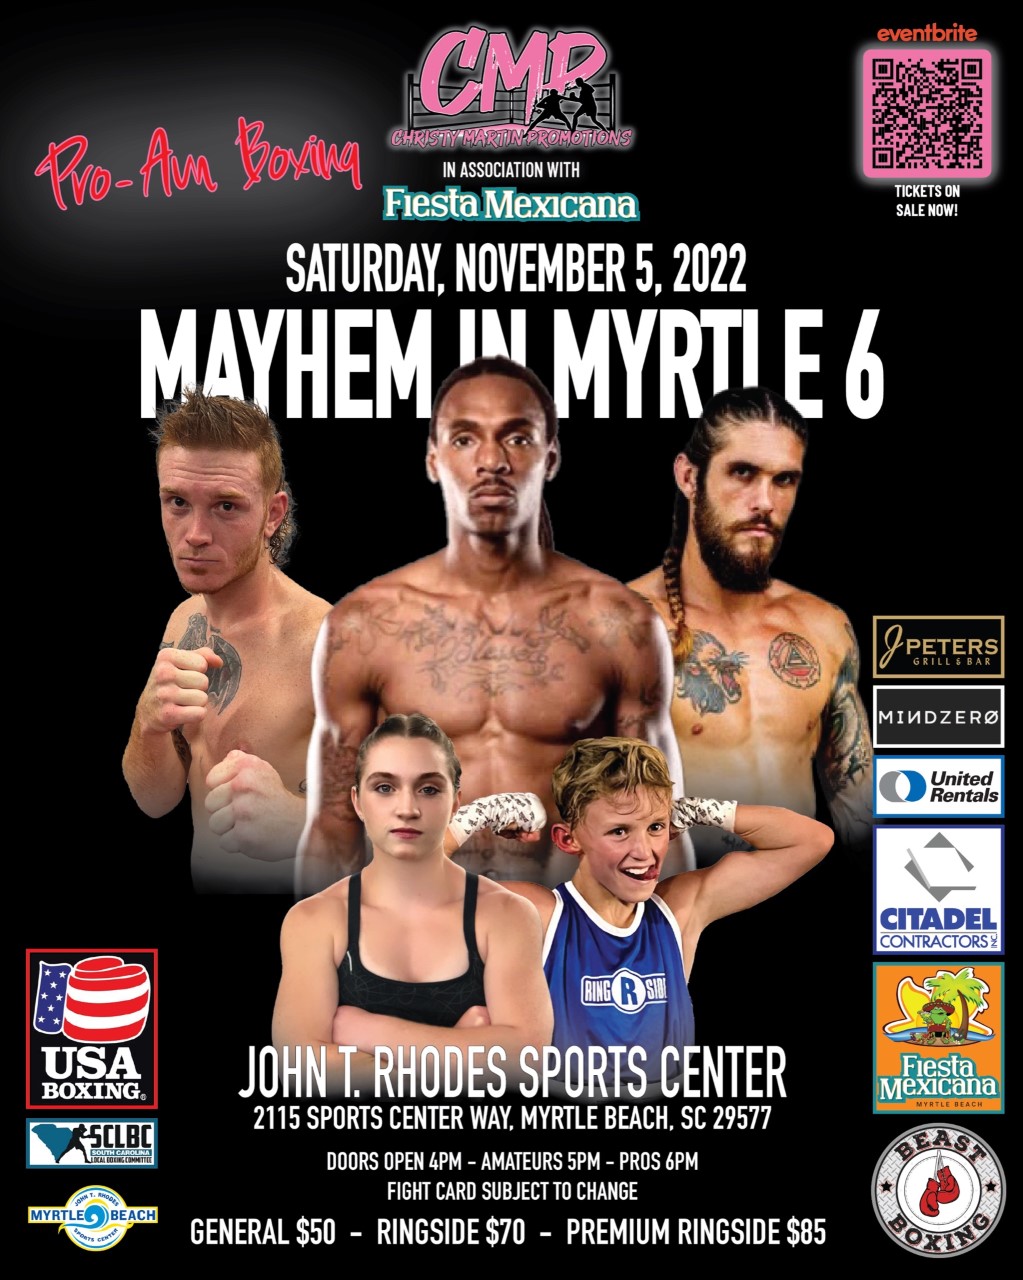 Mayhem In Myrtle 6! Tickets on sale now at Beast Boxing and Eventbrite